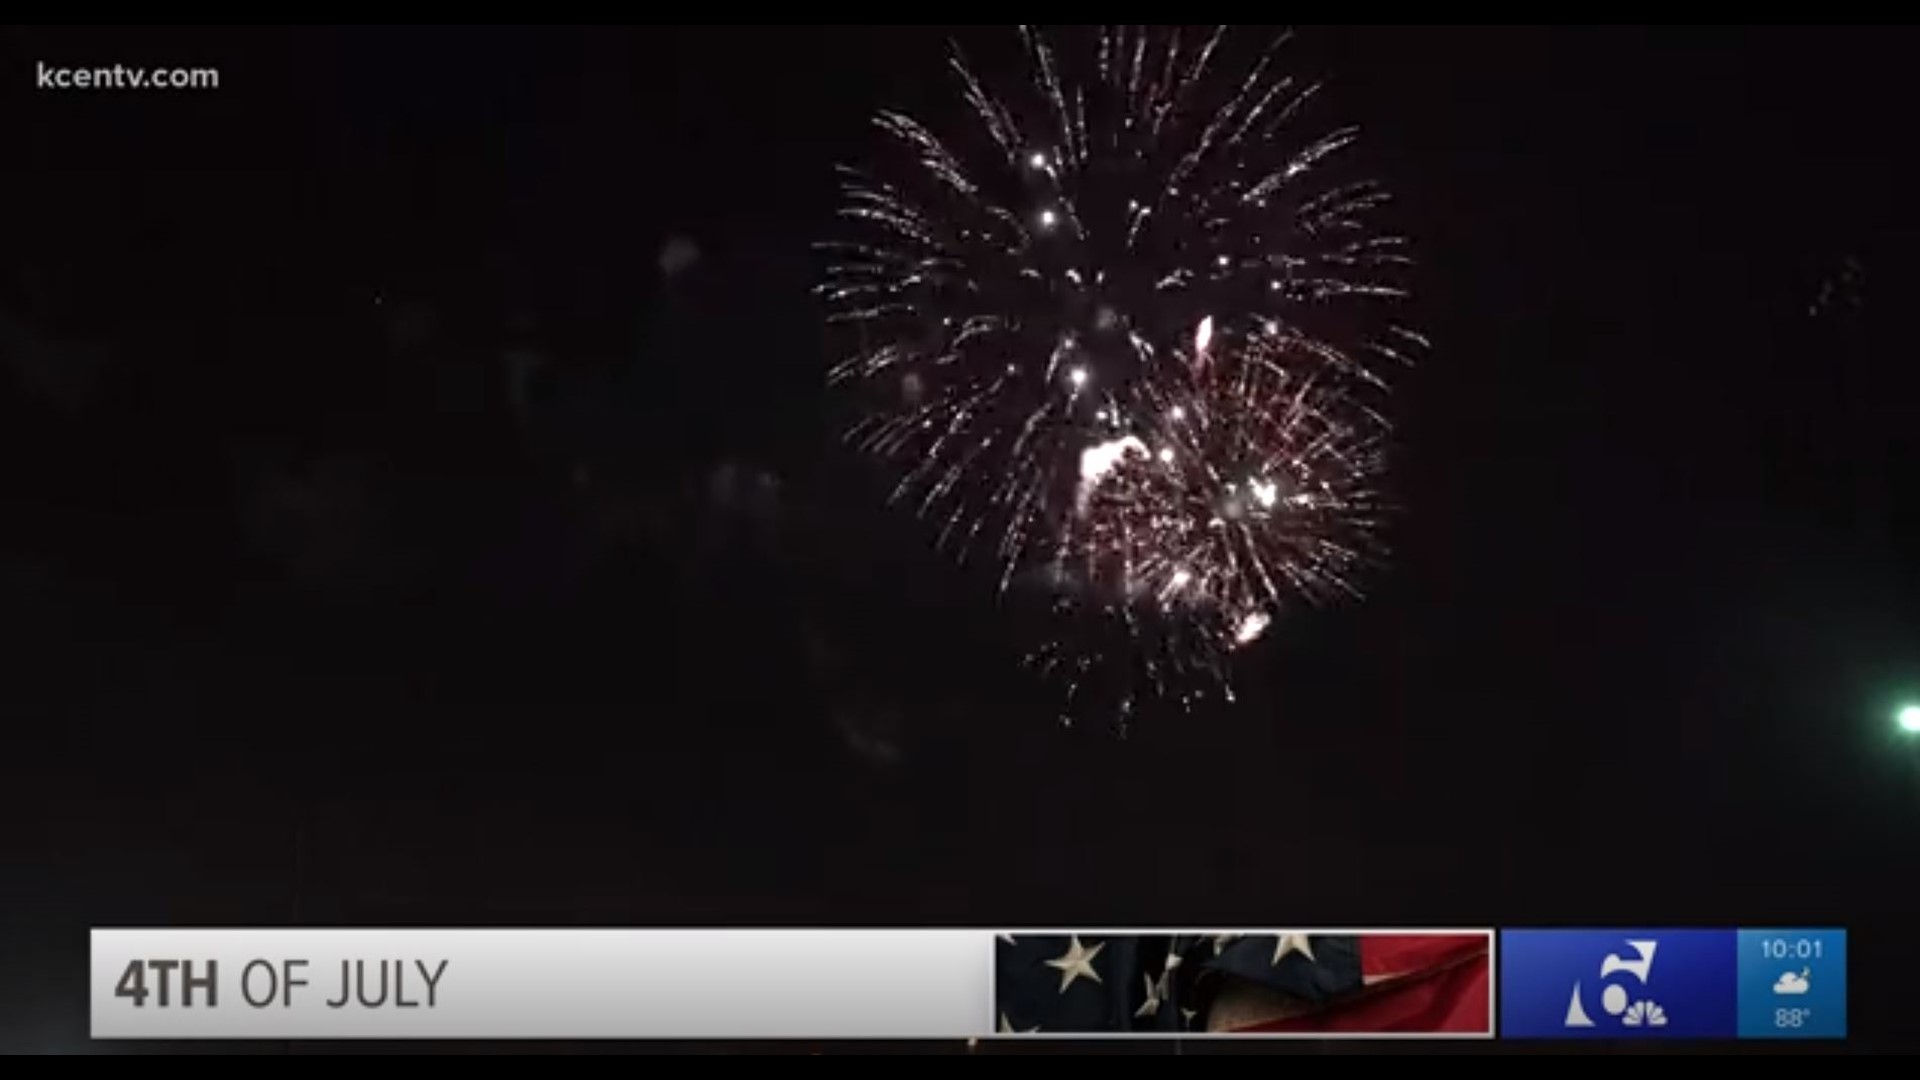 KCEN Channel 6 reporter explored the Fourth of July festivities on Fort Hood.